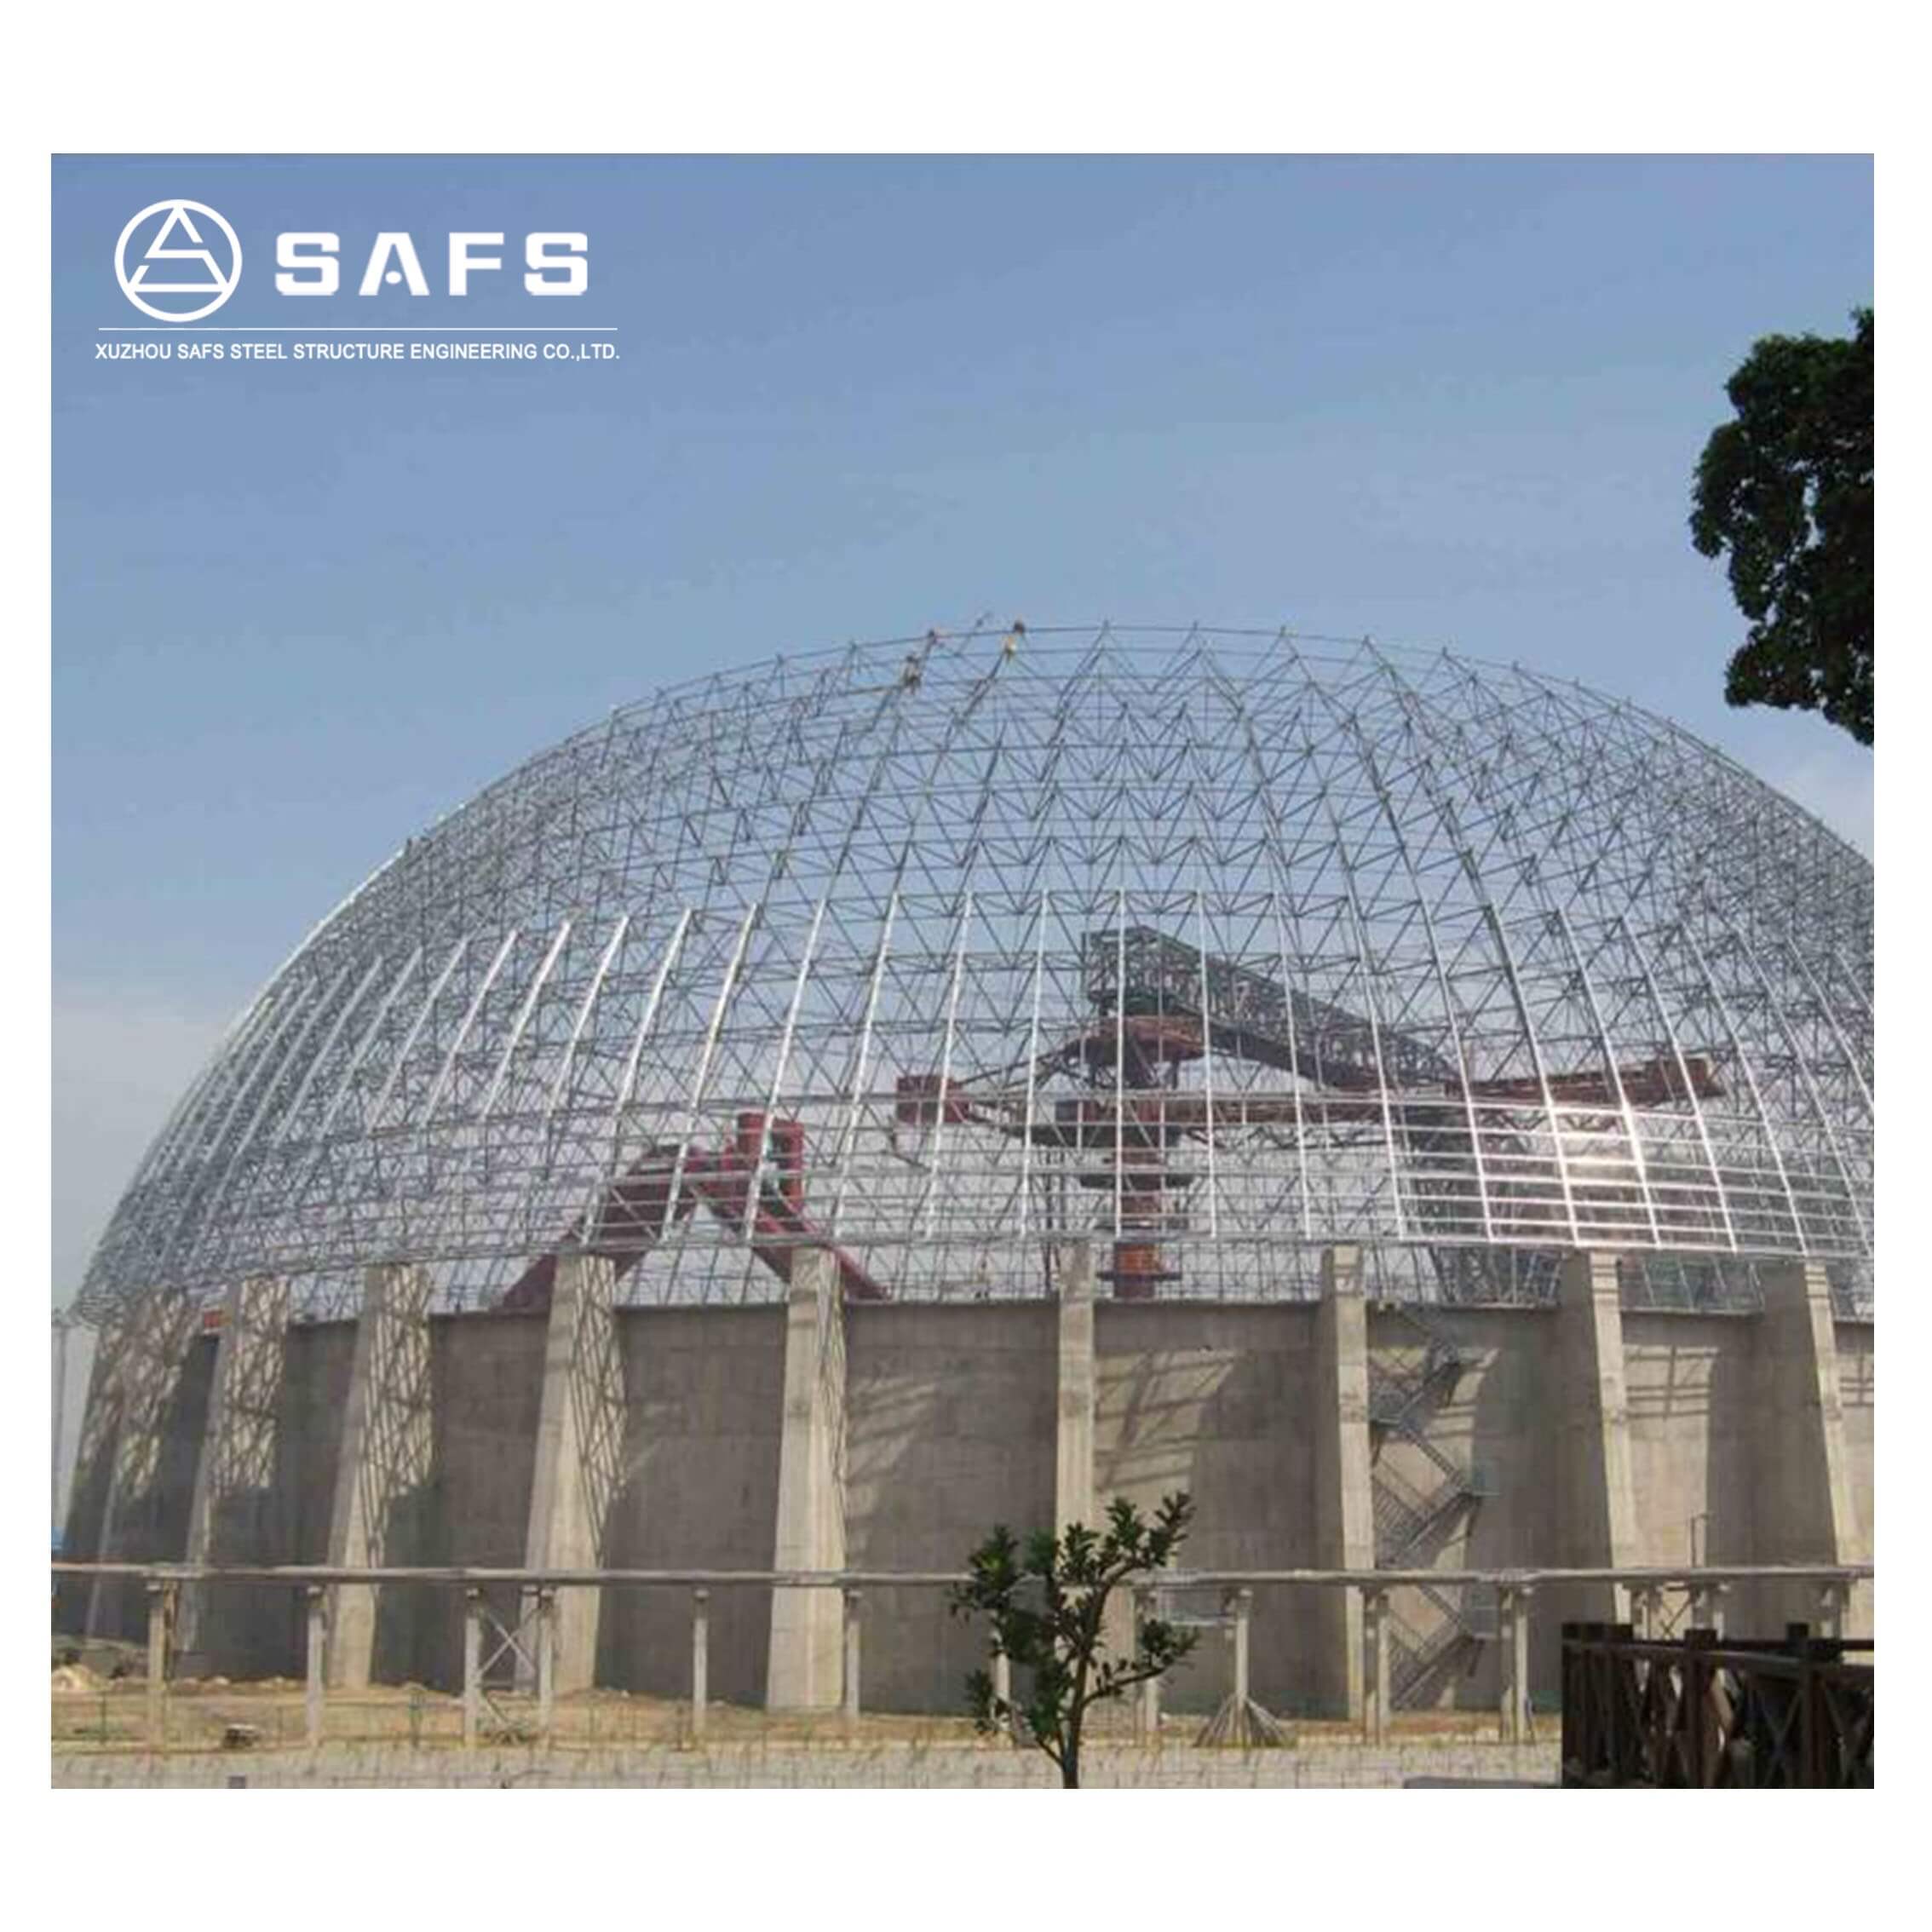 Prefabricated Steel Structure Dome Coal Storage Warehouse Building